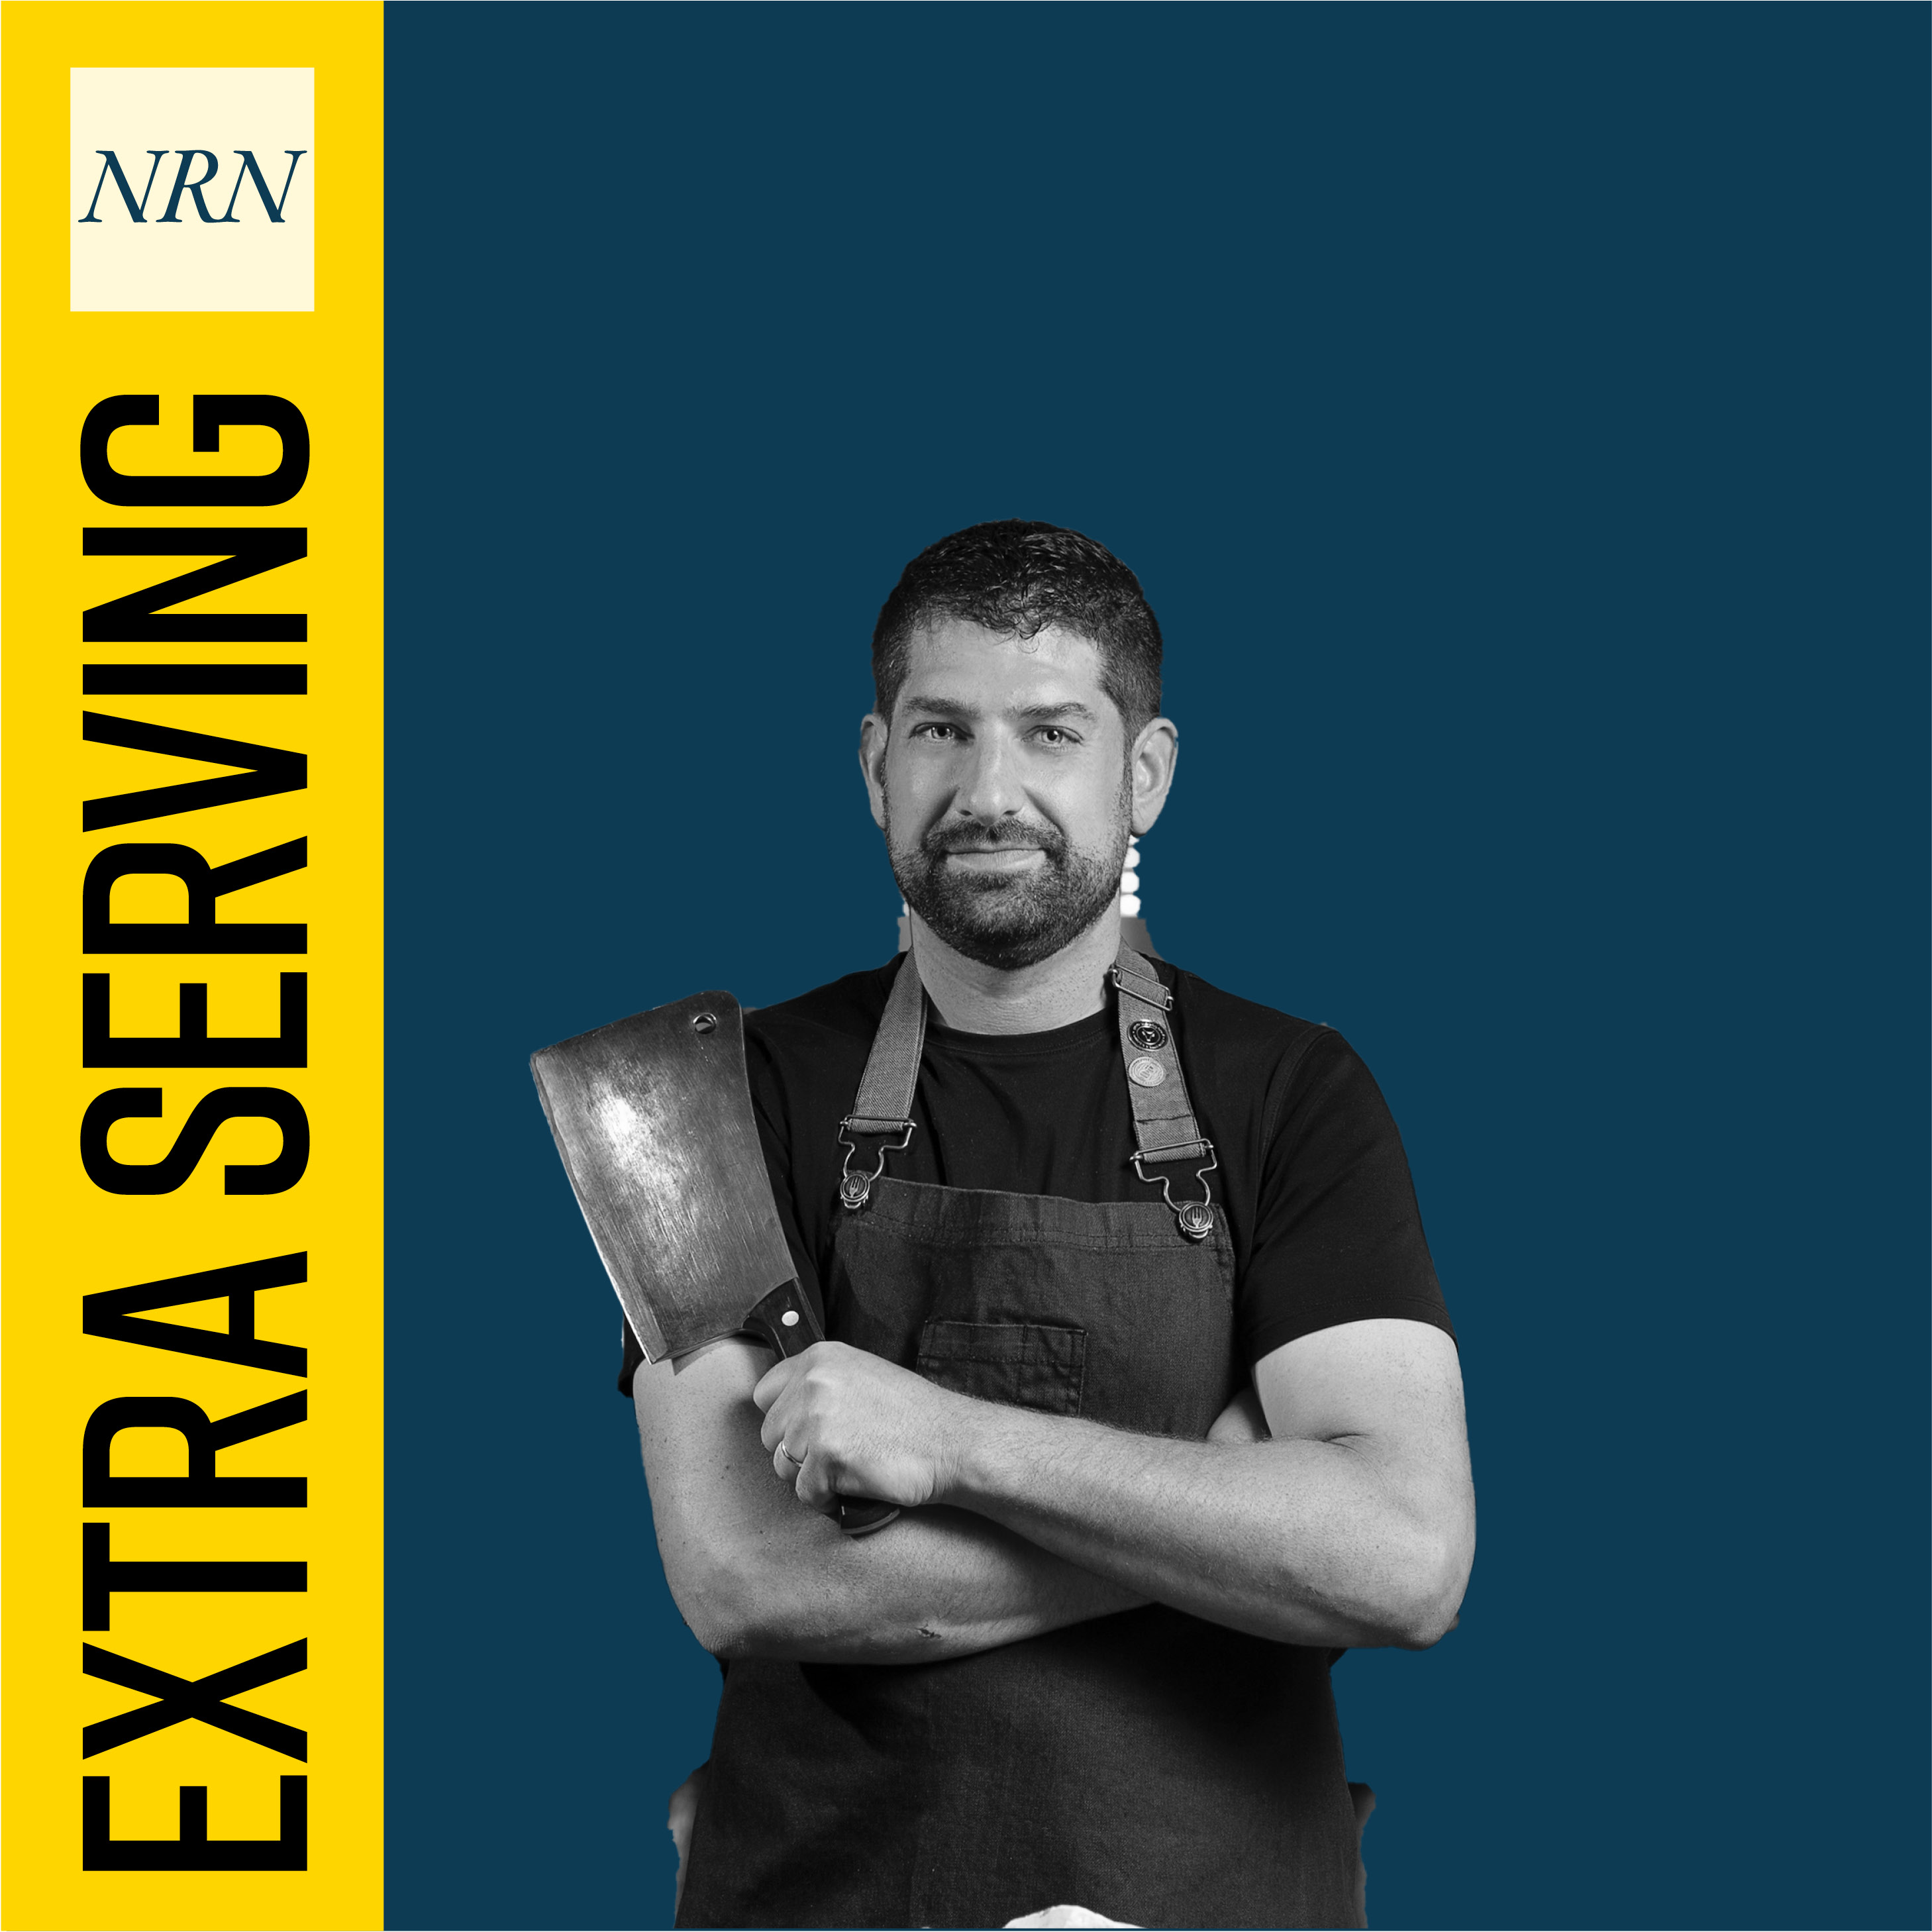 Matt King, chief culinary officer of PPX Hospitality Brands, joins the podcast